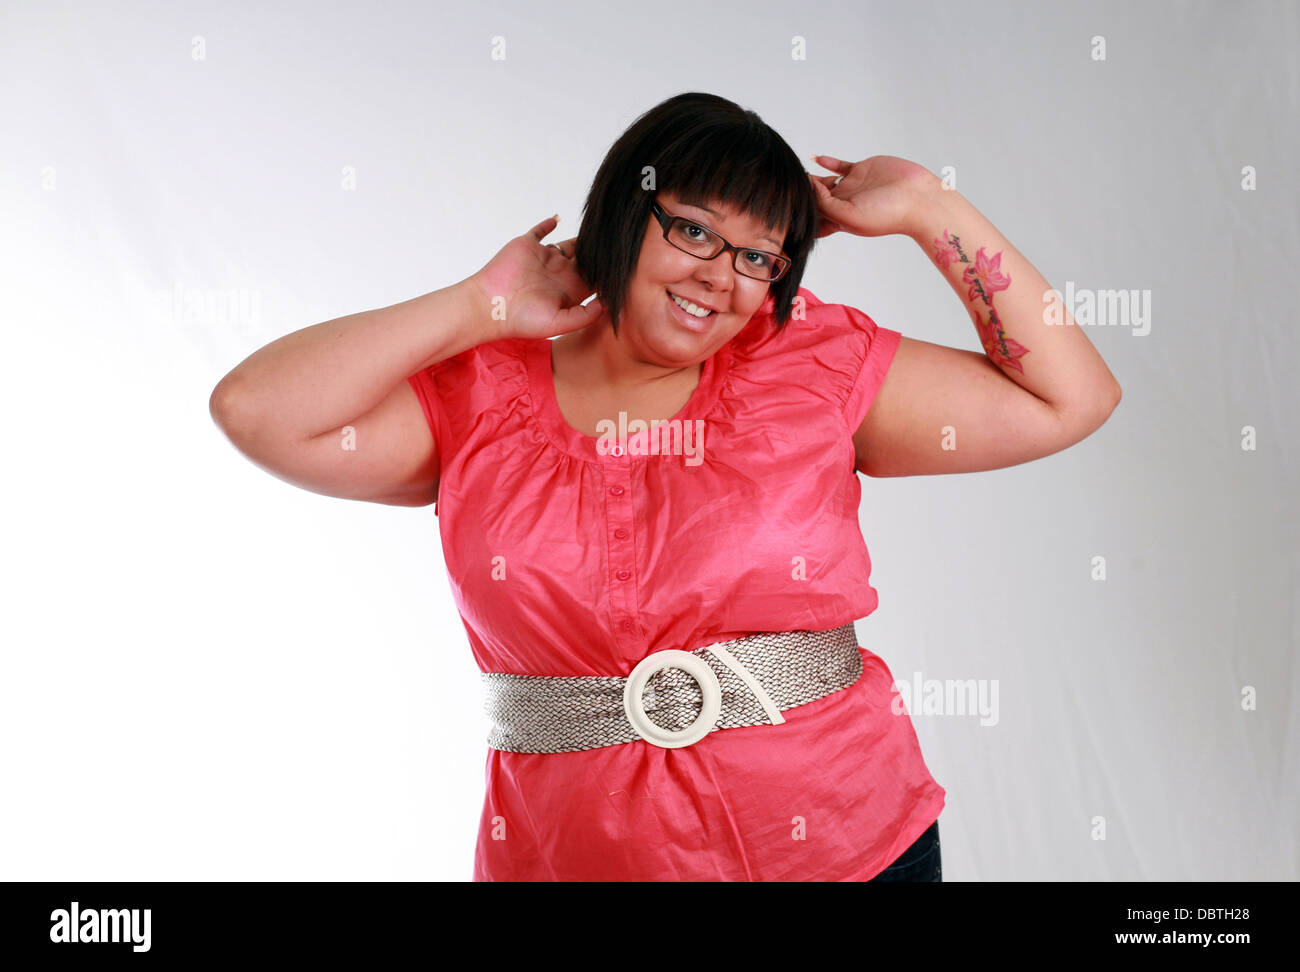 plus size black model with tattoo smiling Stock Photo